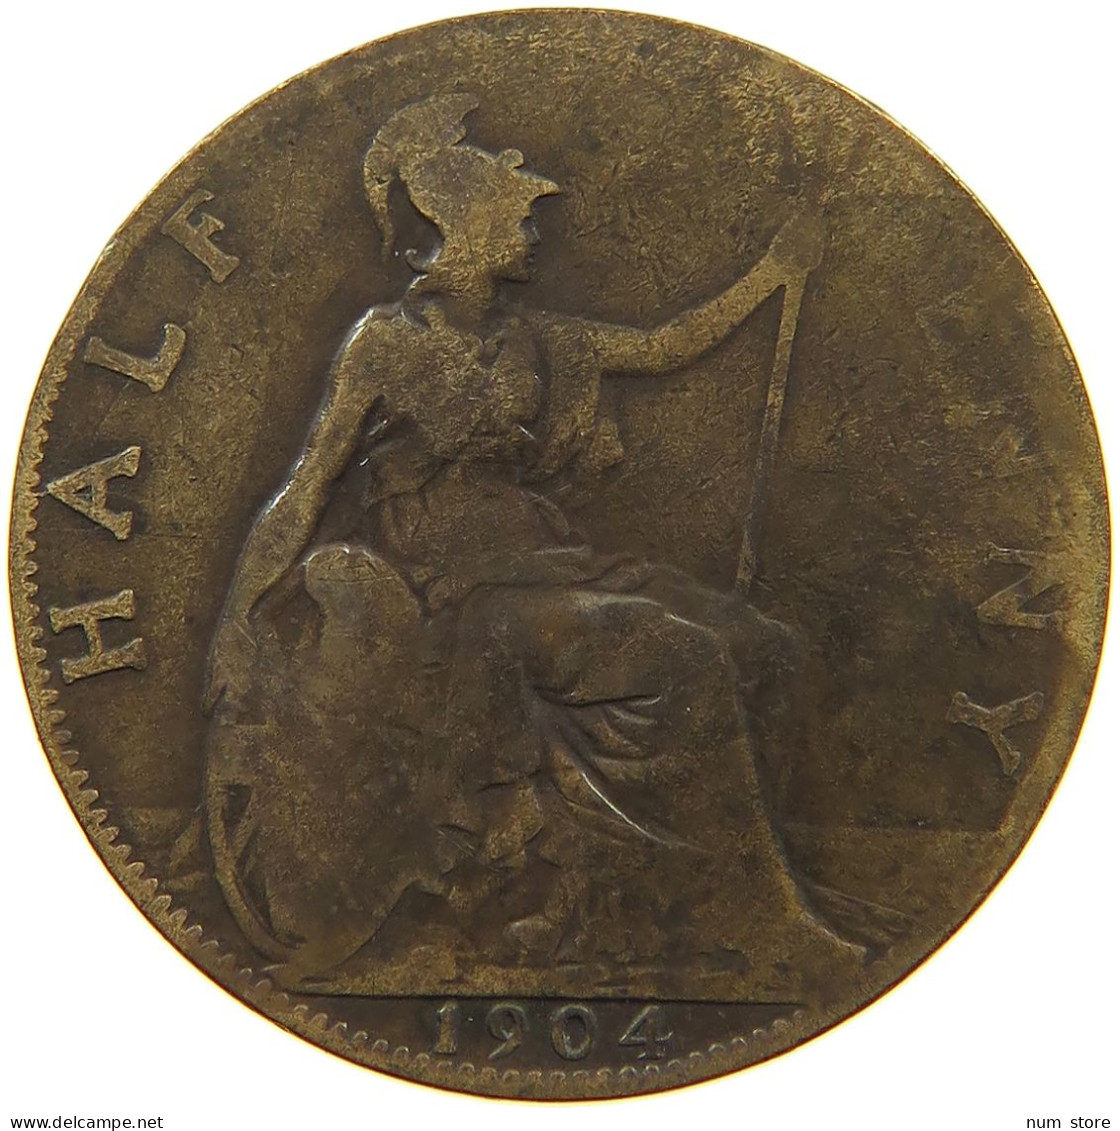 GREAT BRITAIN HALFPENNY 1904 #a058 0091 - C. 1/2 Penny